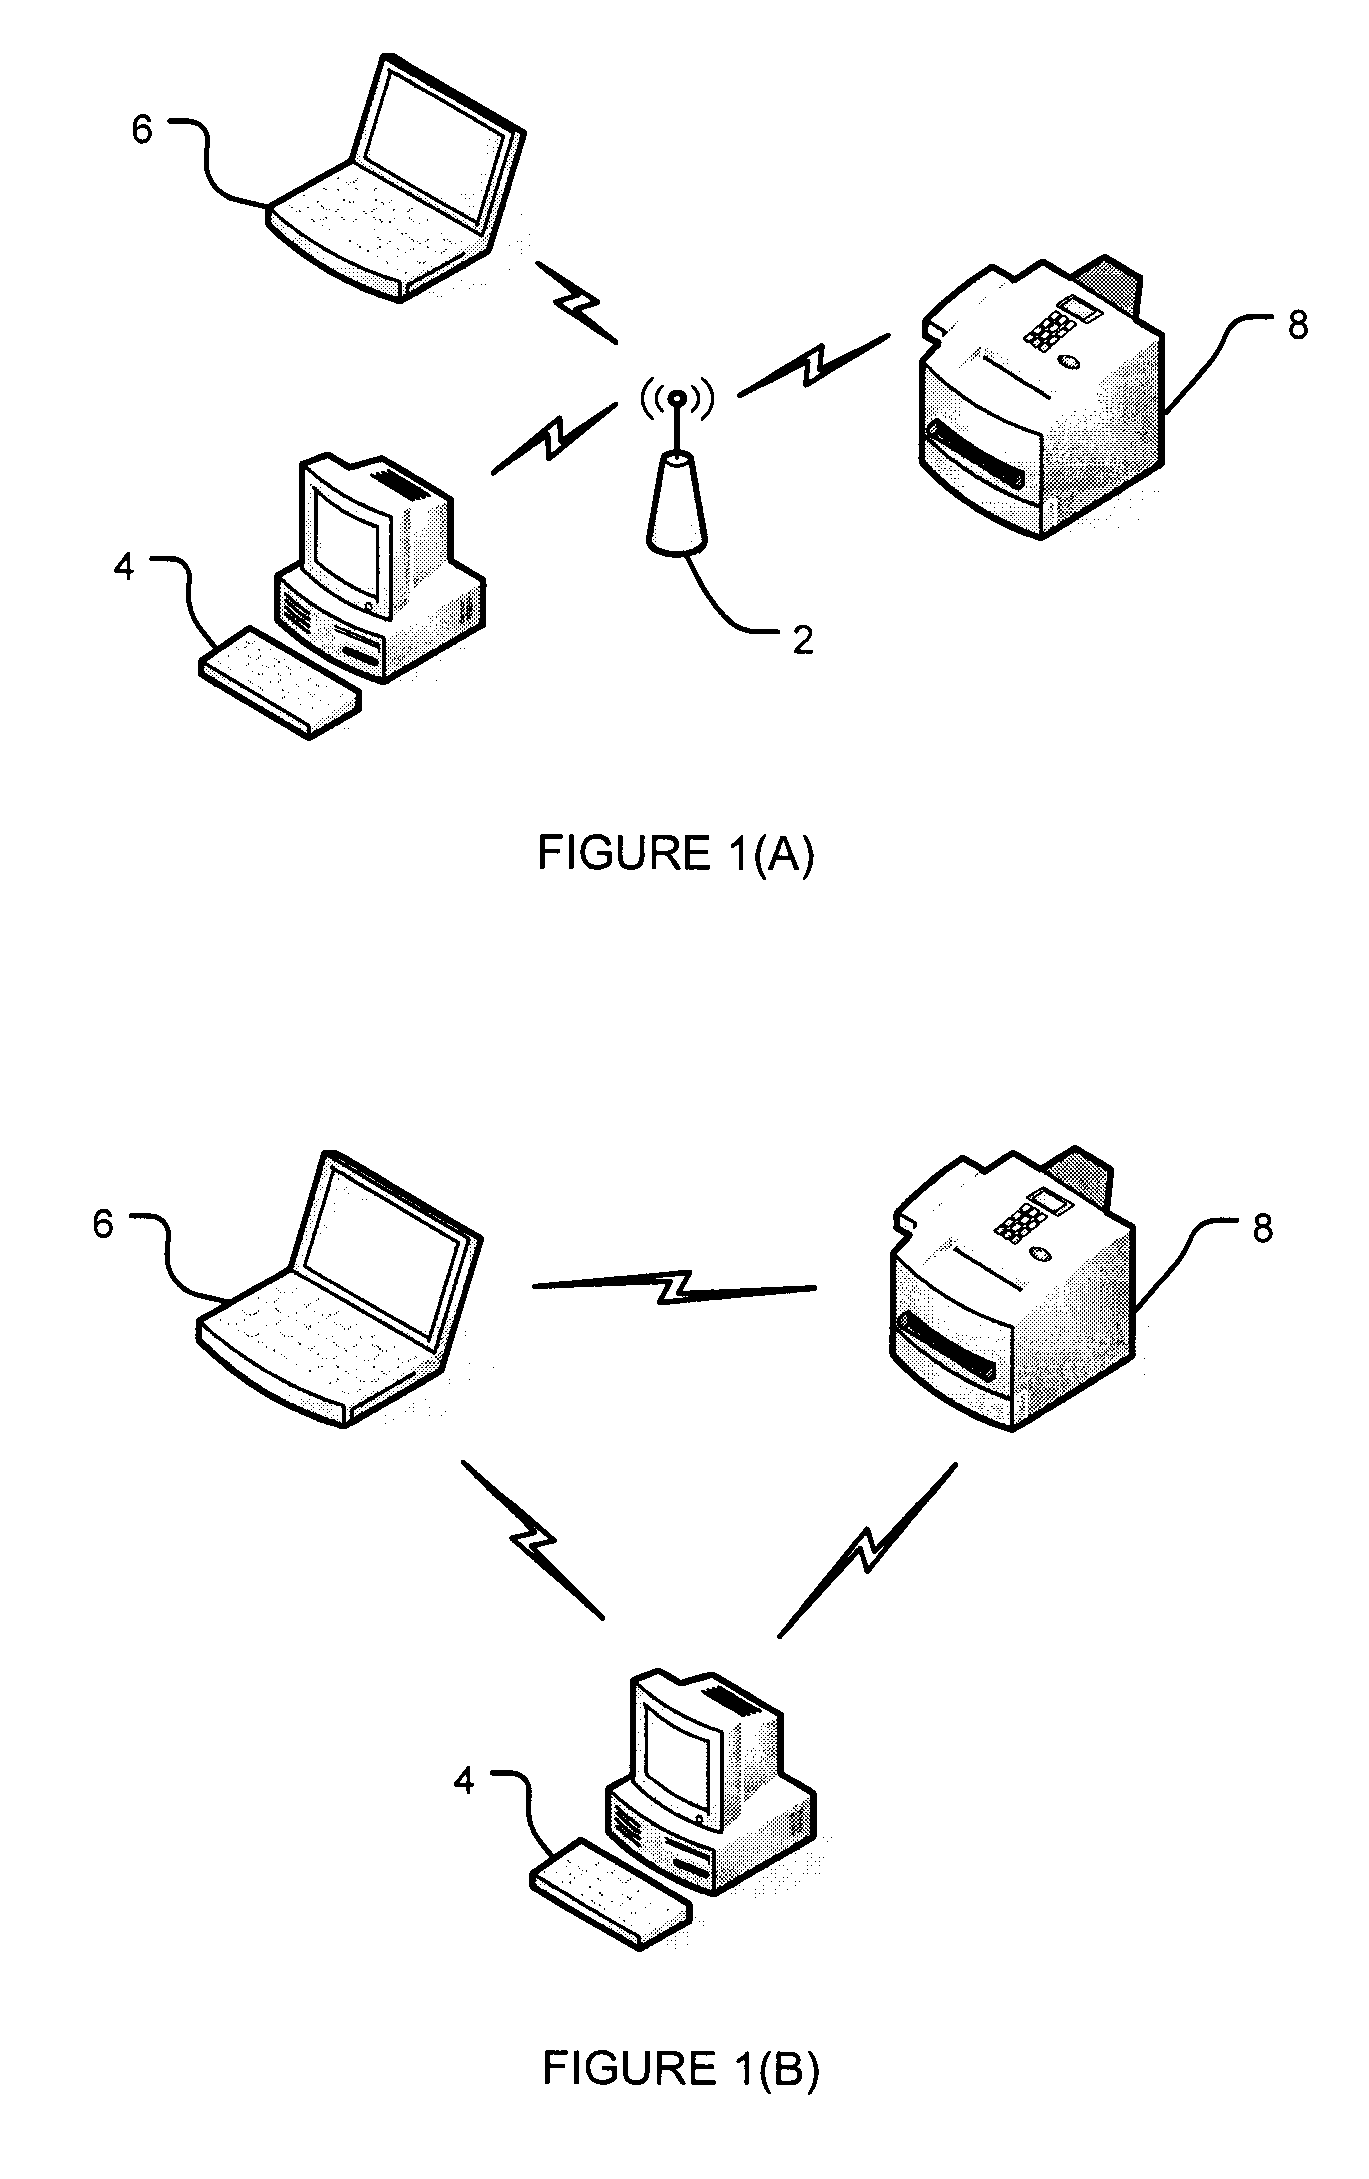 Ad-hoc network power save system and method